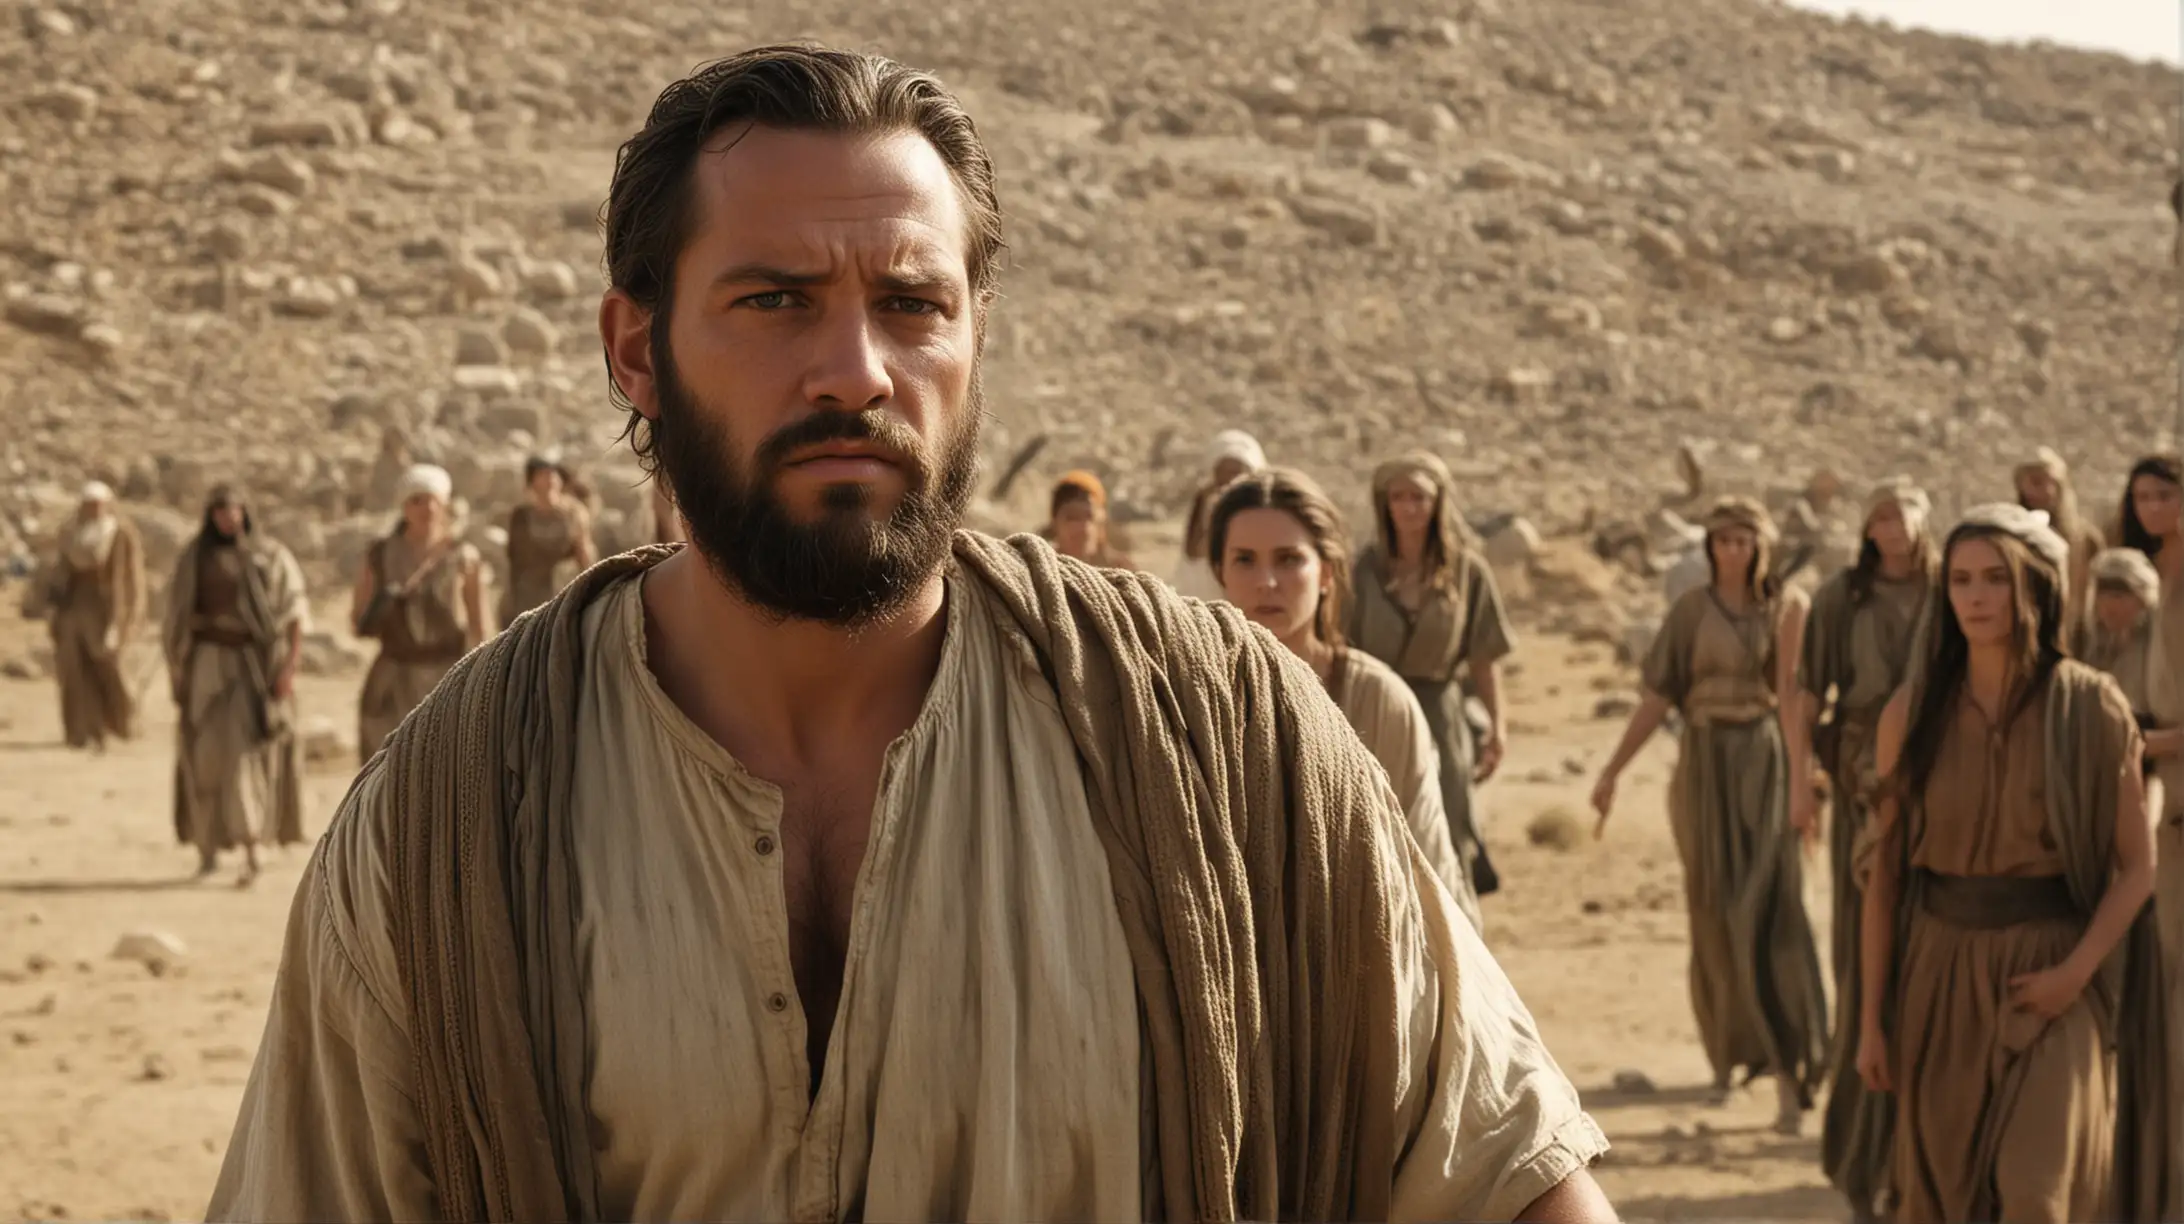 Strong Biblical Leader with Followers in Ancient Setting